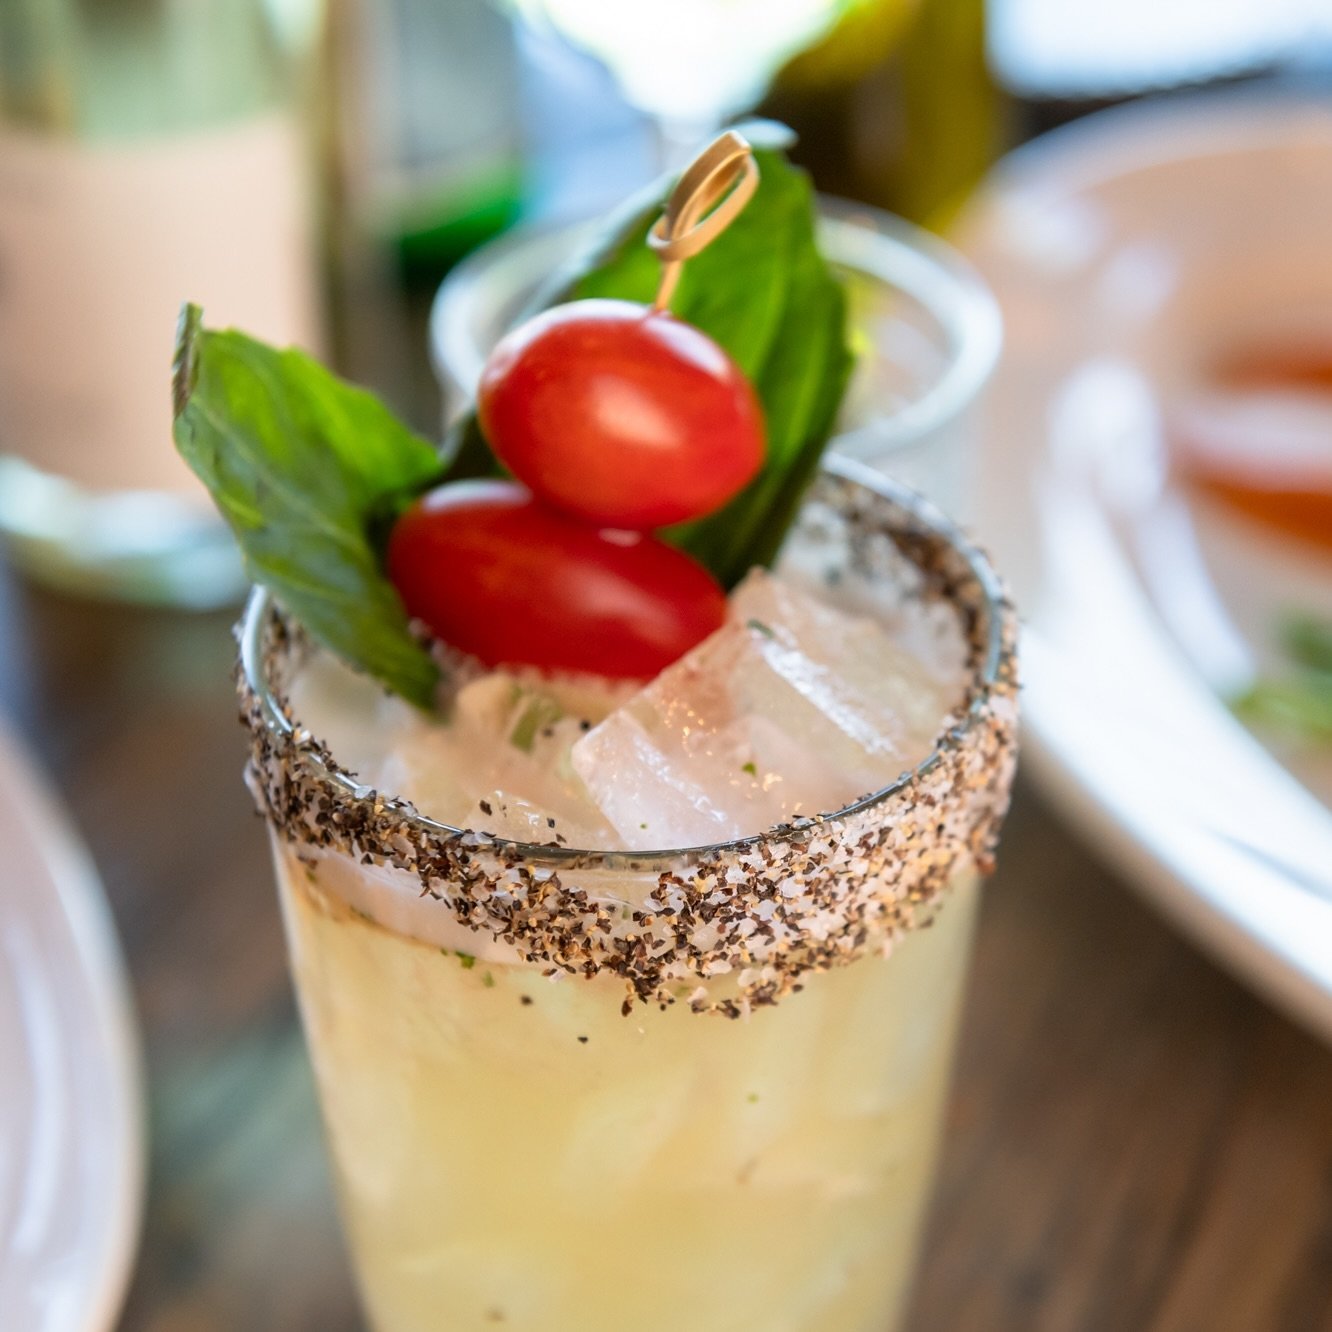 It&rsquo;s the perfect day for a Summers Garden Margarita! Made with herradura silver, cointreau, watermelon, cherry tomato, fresh basil and lime. Delicious and refreshing! #luccaosteria

#cocktails #newdrinks #luccaoakbrook #lucca